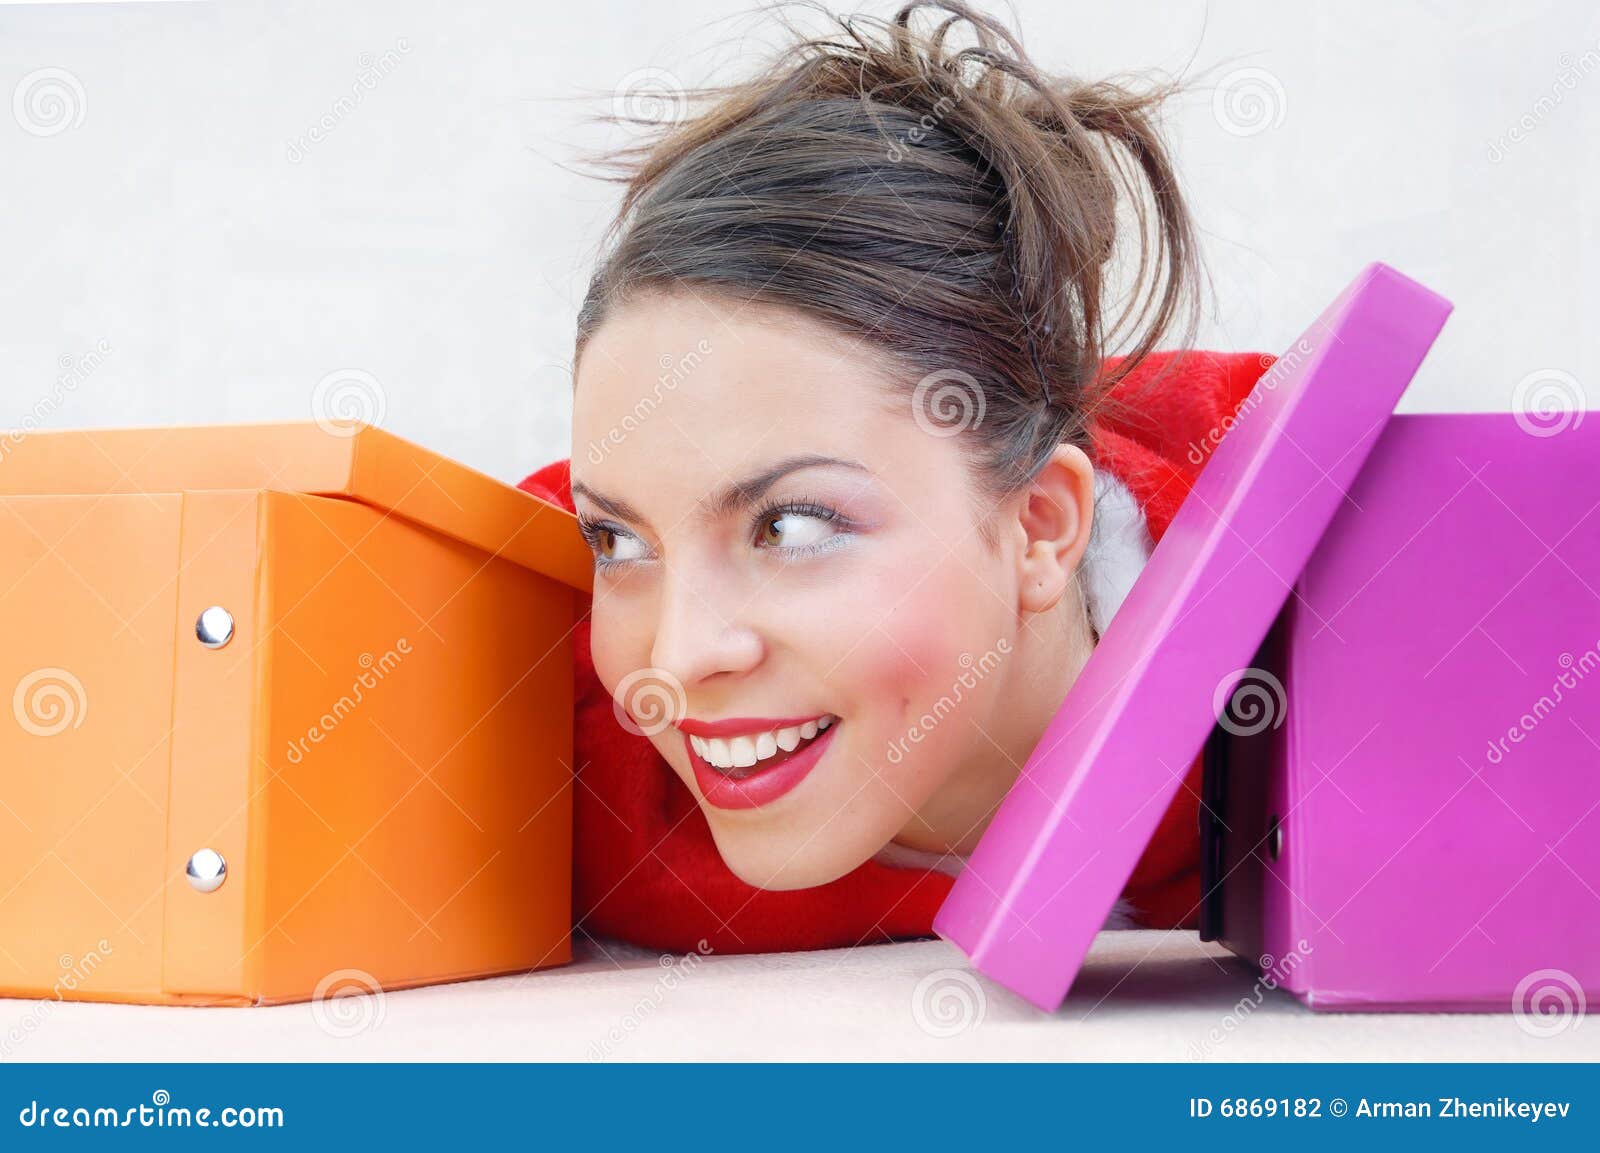 Happy lady with gift boxes - happy-lady-gift-boxes-6869182